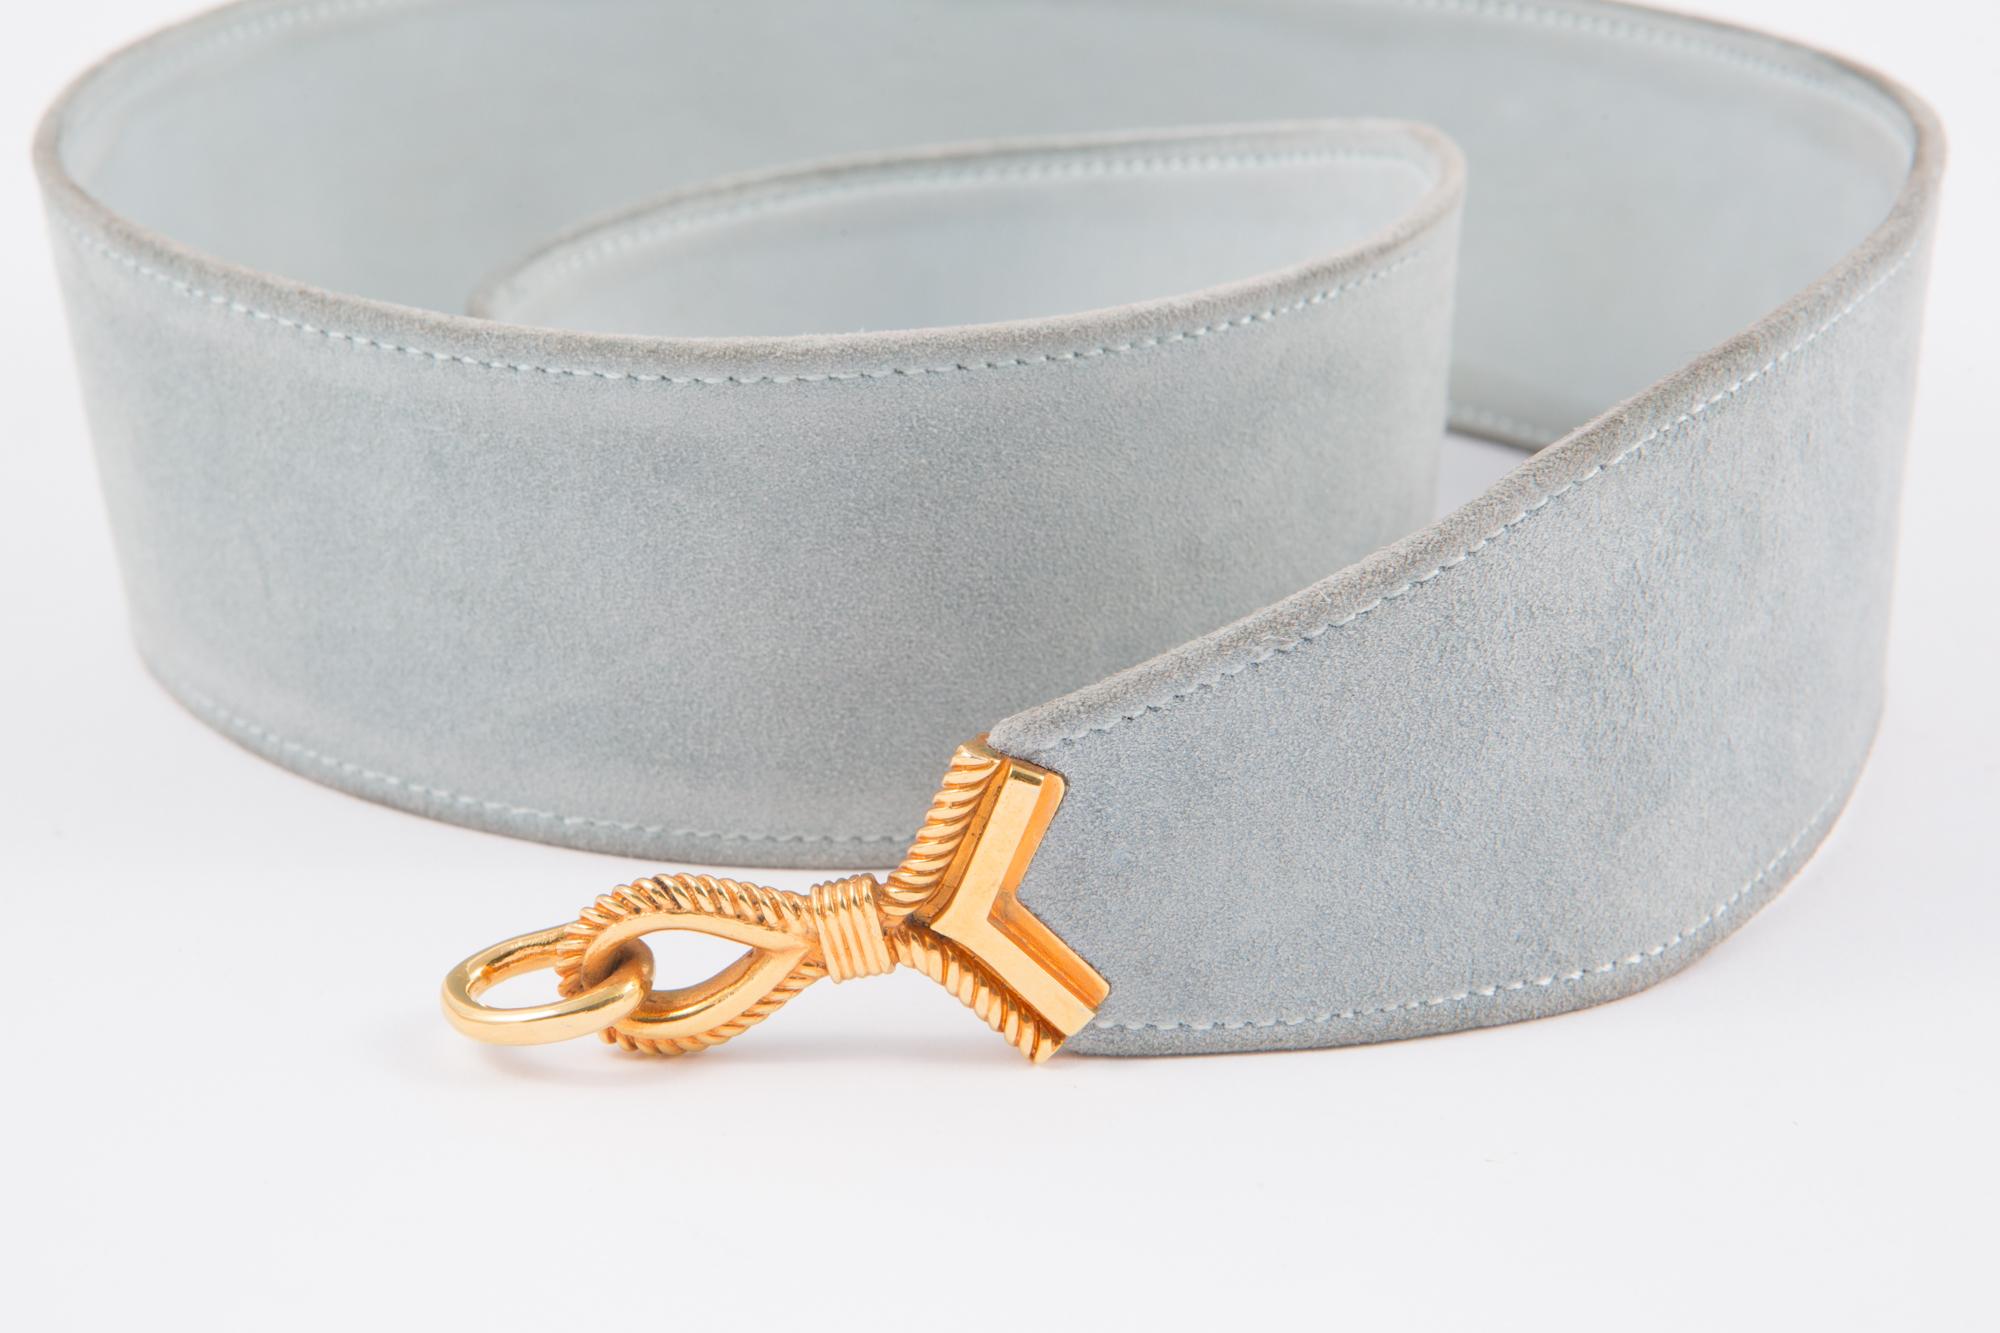 Light blue sky suede large leather Hermès 'Cordeaux' belt featuring a plated gold hook fastening, a matching lamb leather inside lining.
Stamp Hermès Paris
In excellent vintage condition. Made in France.
We guarantee you will receive this gorgeous